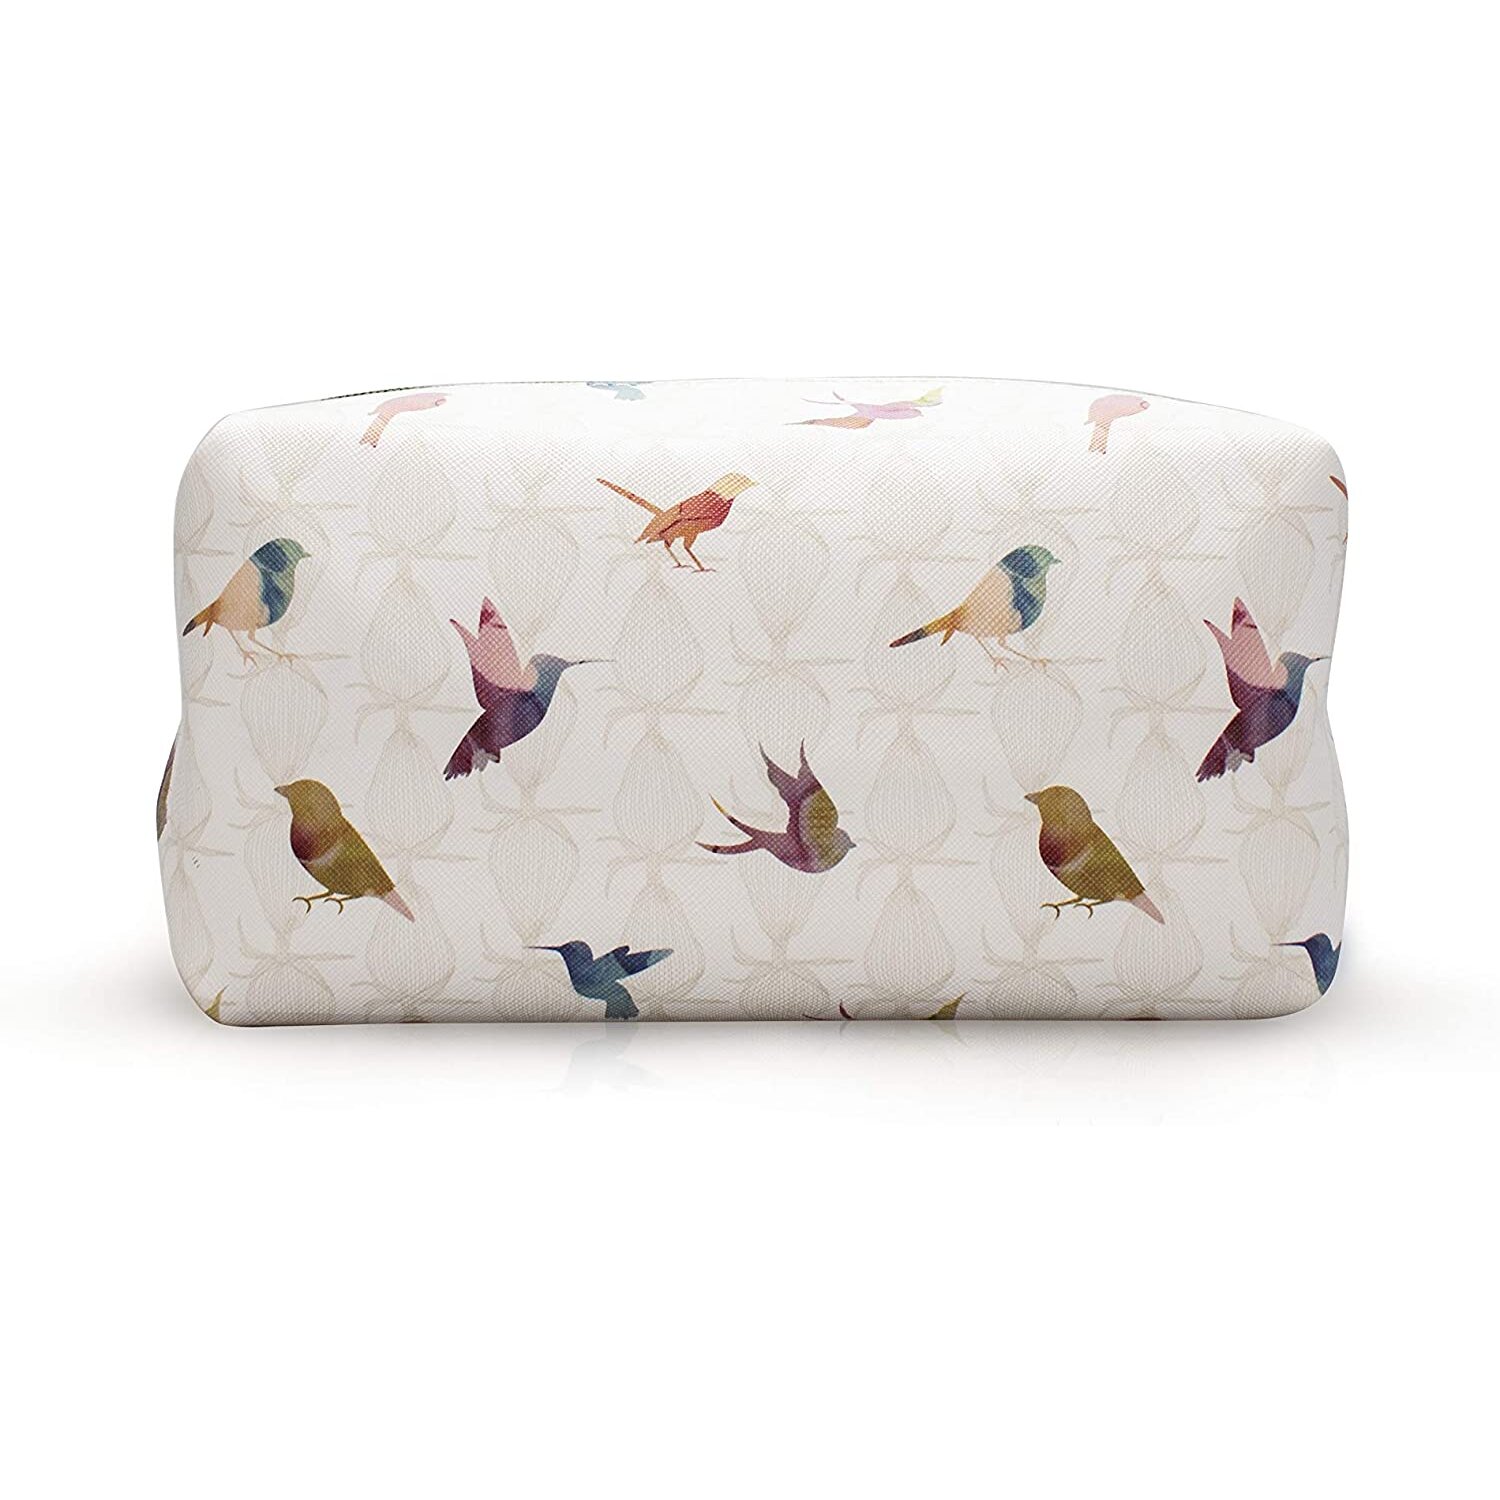 TaylorHe Water Proof Large Capacity Pencil Case Pencil Holder Make-up Pouch Make-up Bag Cosmetic Case Colourful Birds